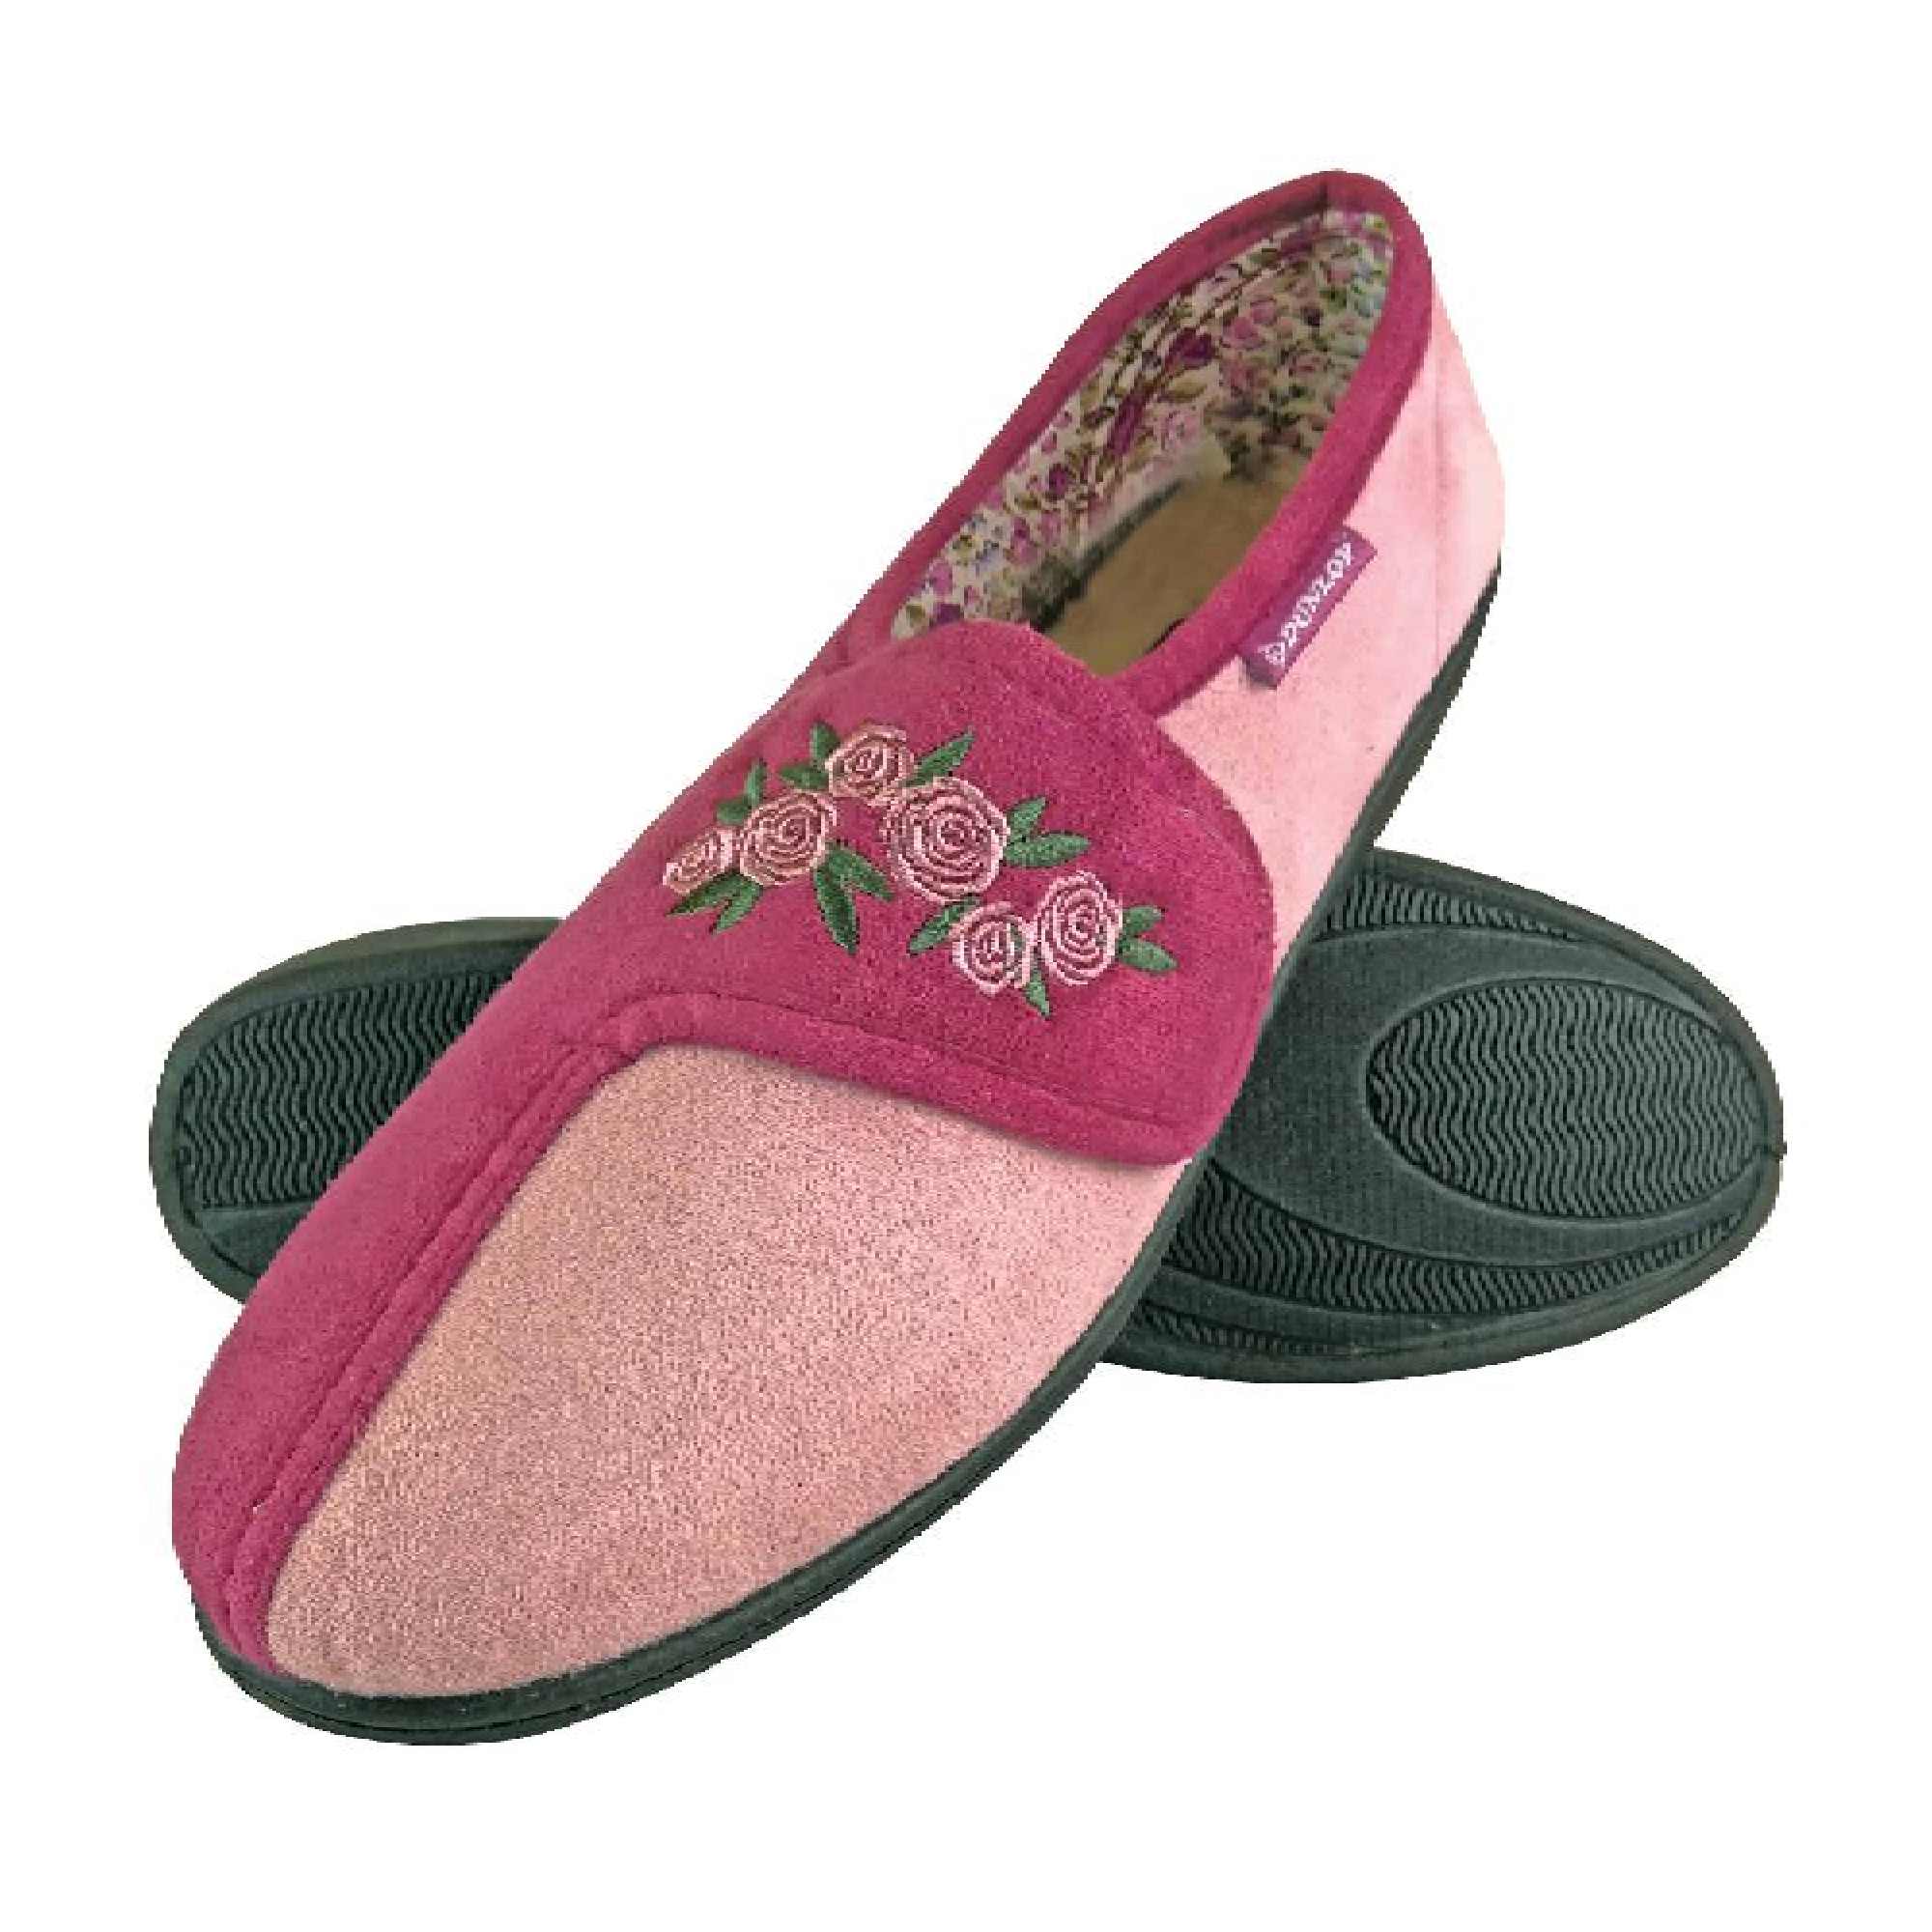 Dunlop Orthopedic Slippers for Ladies with Velcro Strap